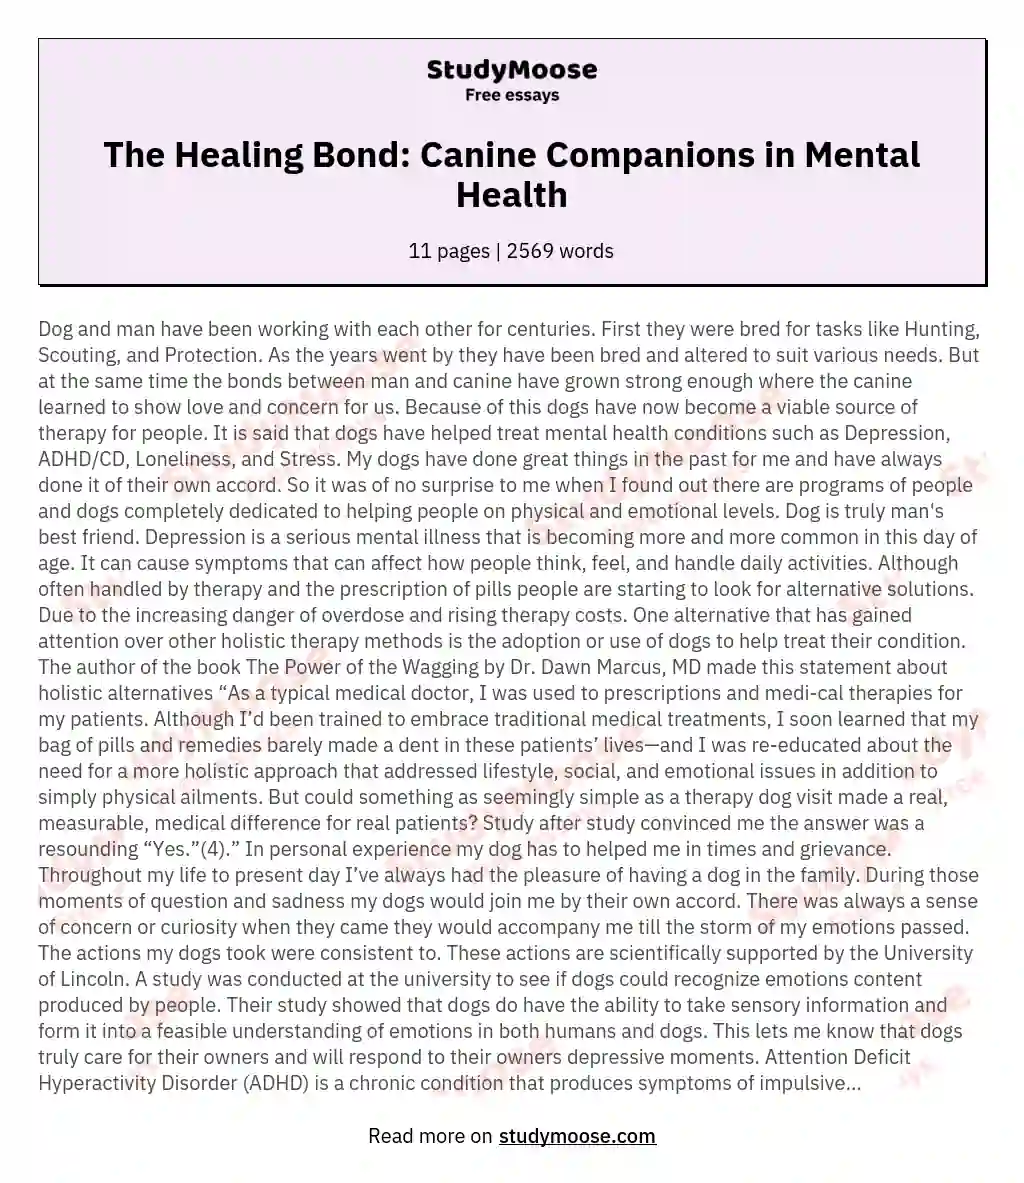 The Healing Bond: Canine Companions in Mental Health essay